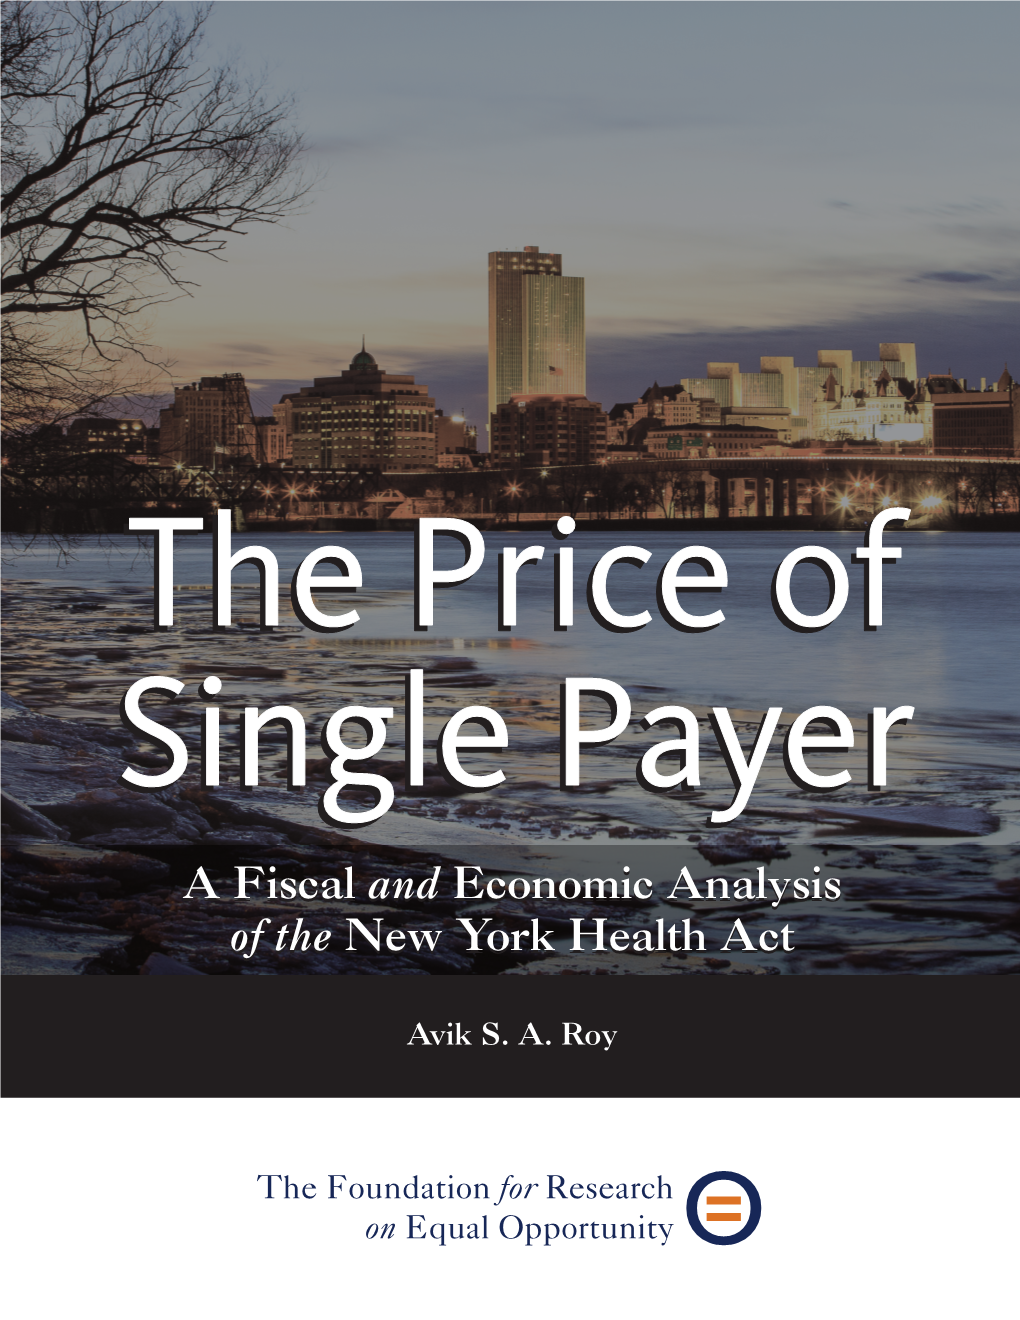 A Fiscal and Economic Analysis of the New York Health Act